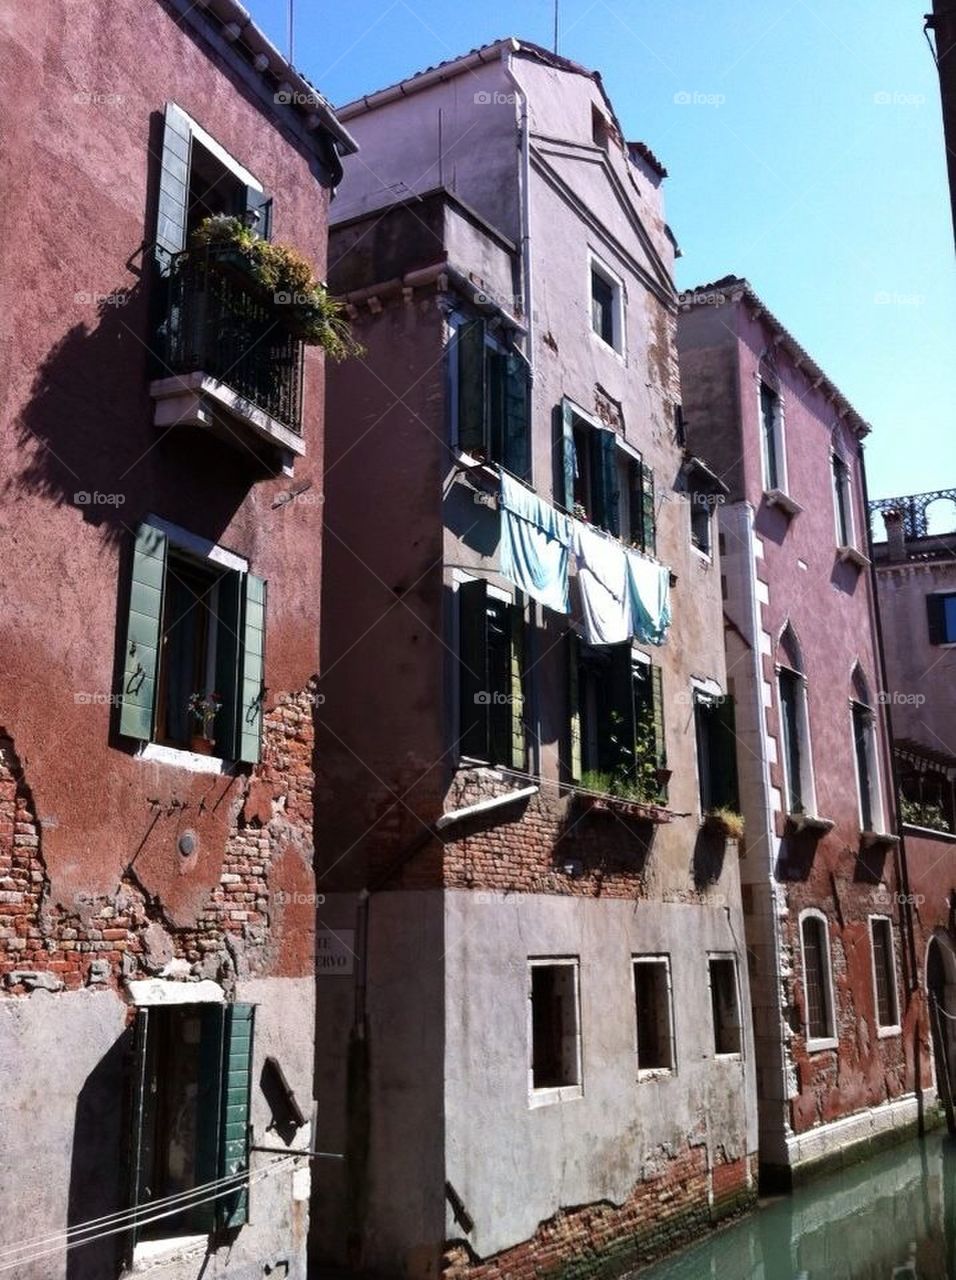 Wash Day in Venice